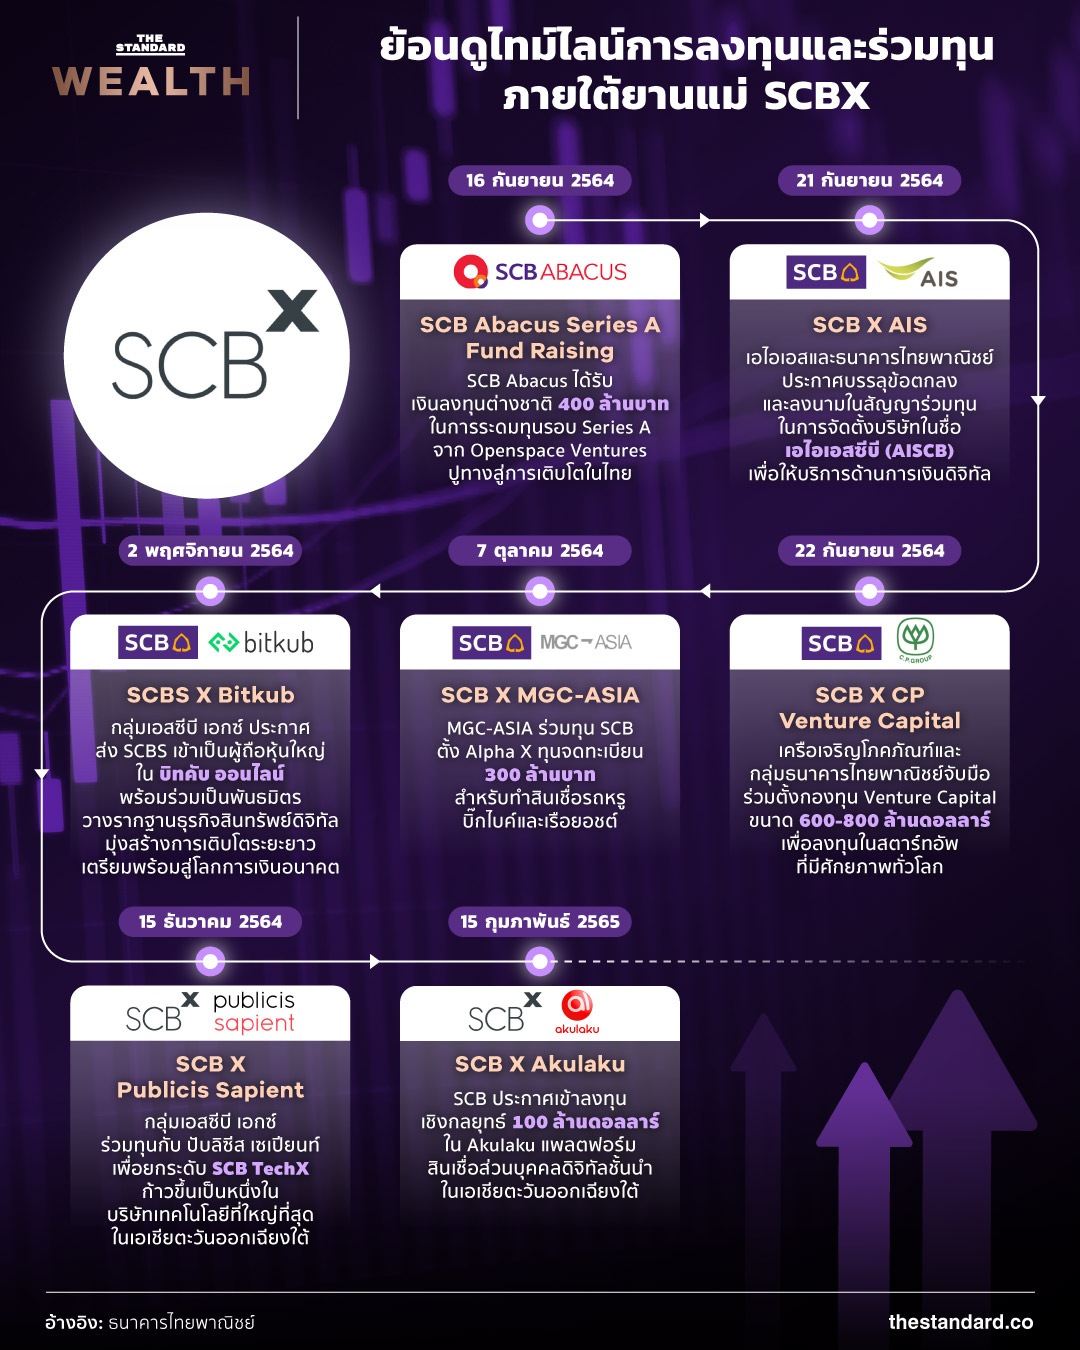 Timeline of investment and venture capital under SCBX